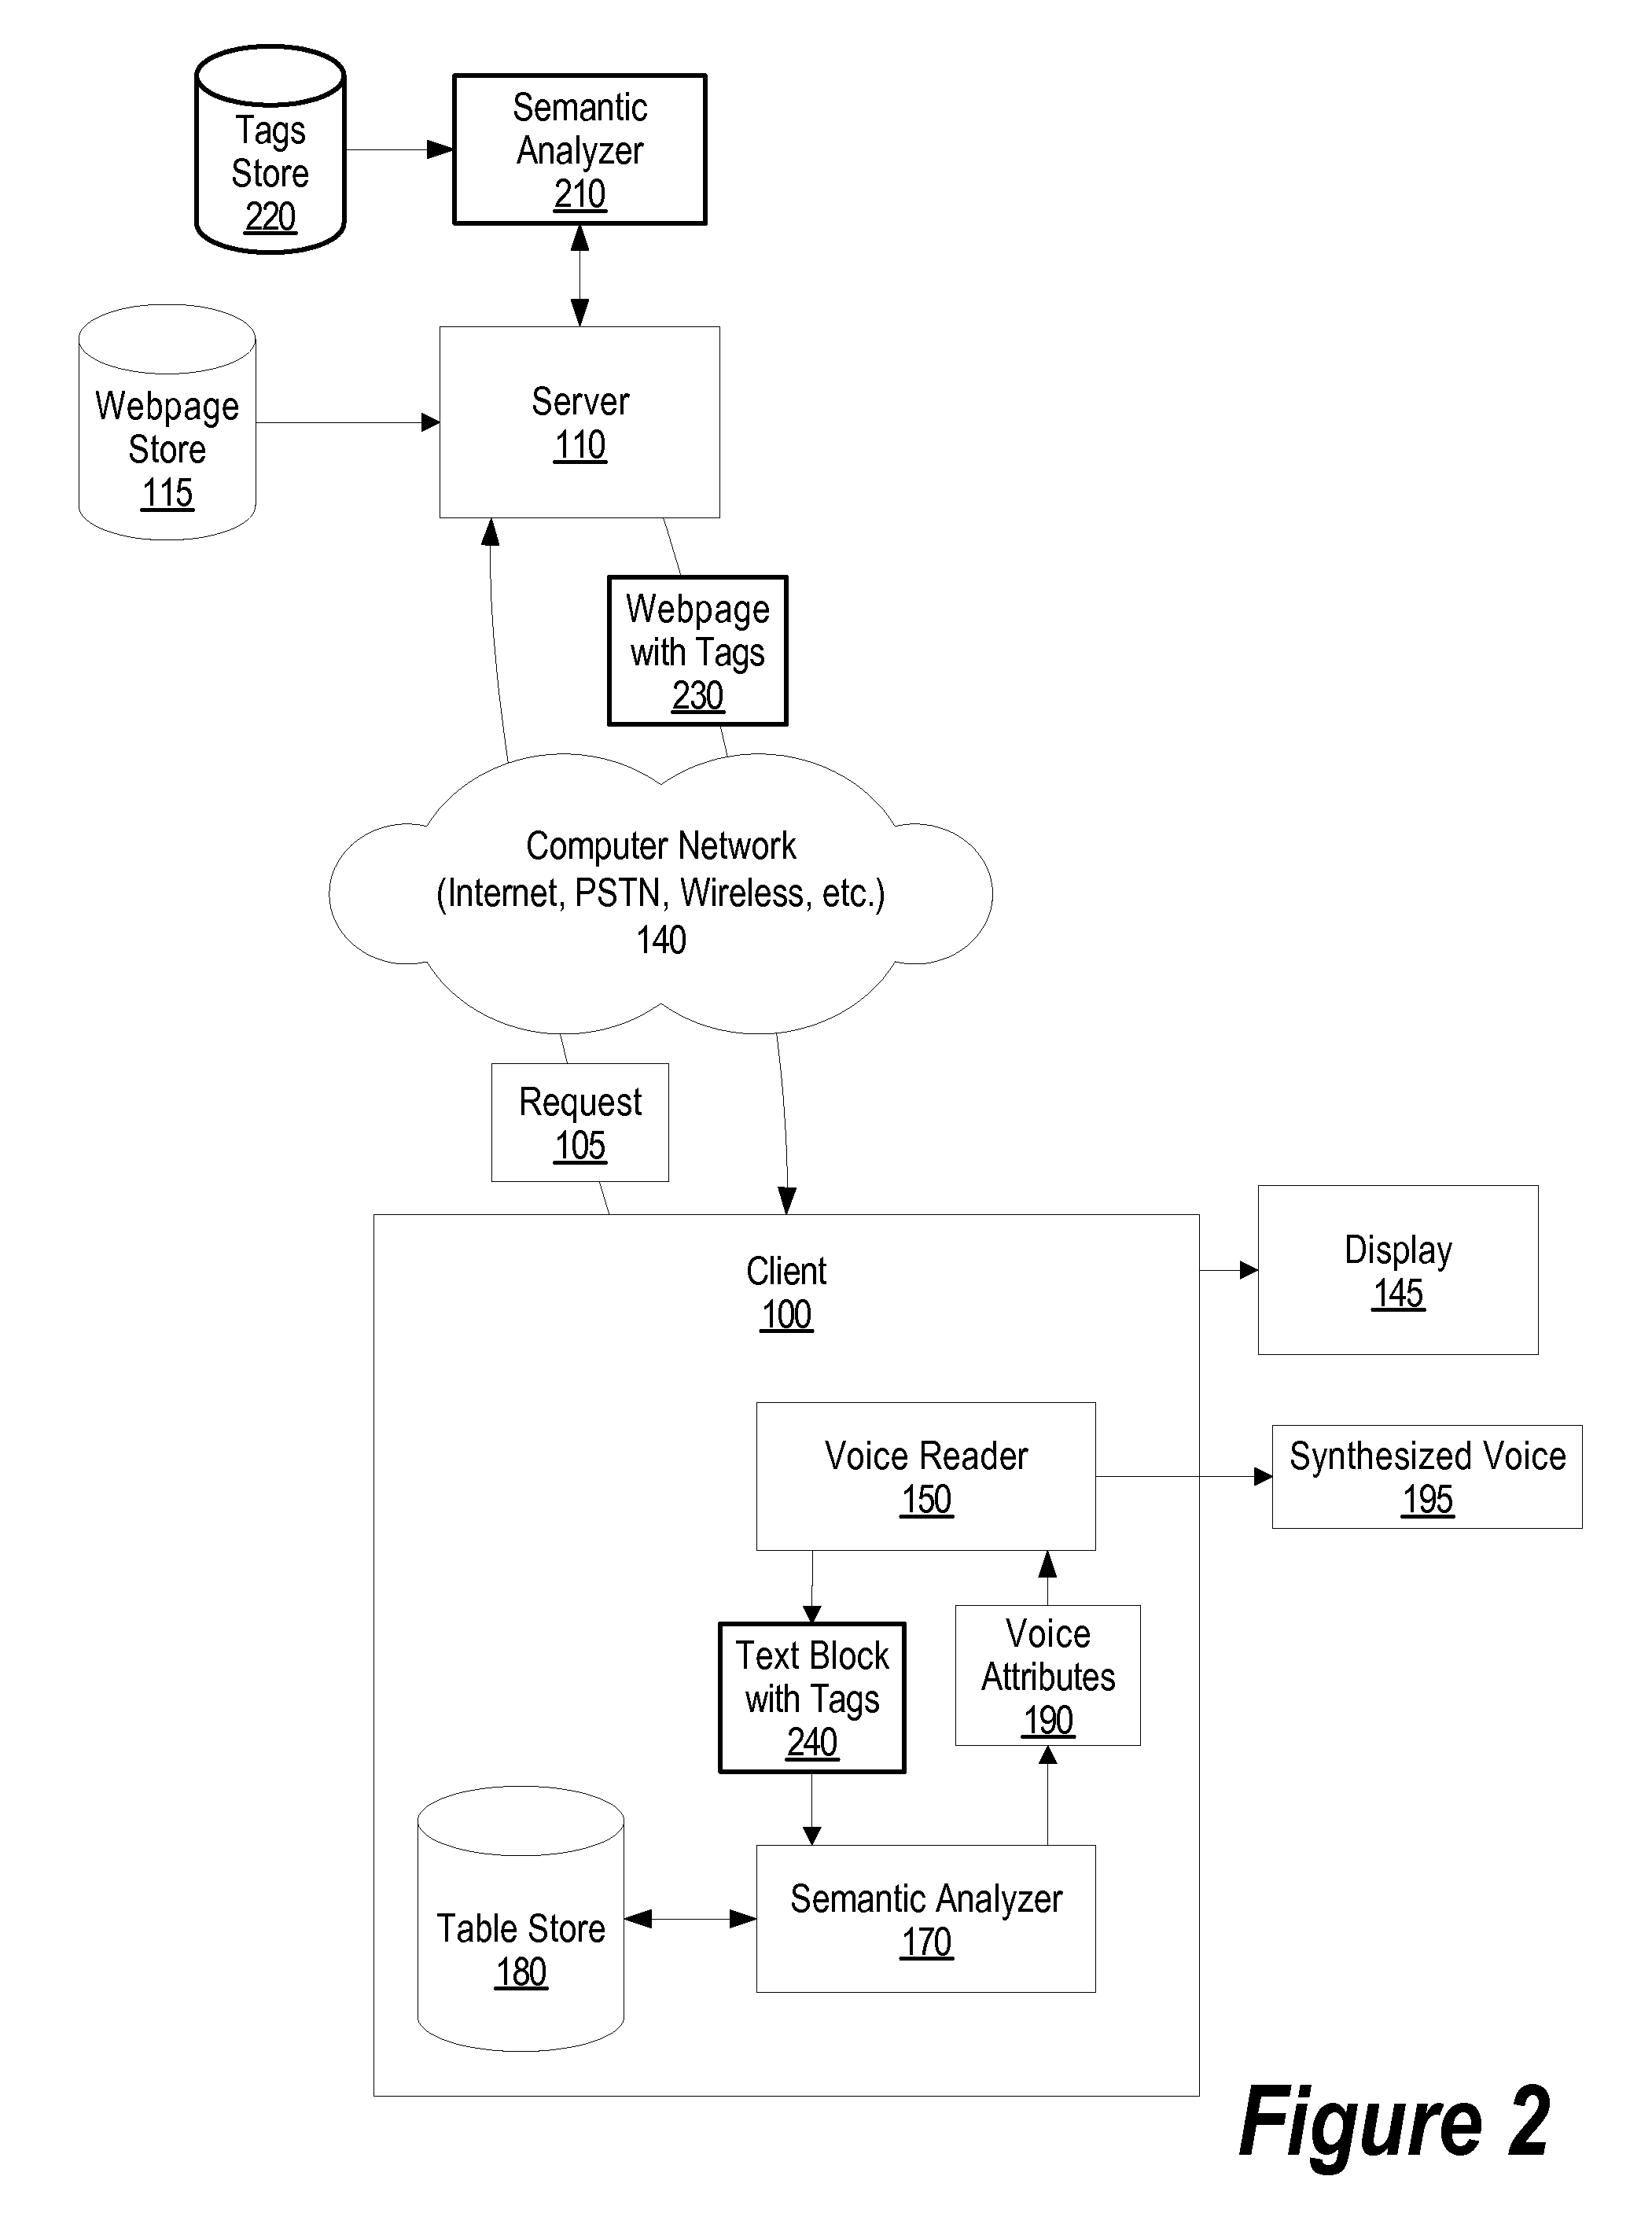 System and Method for Configuring Voice Readers Using Semantic Analysis